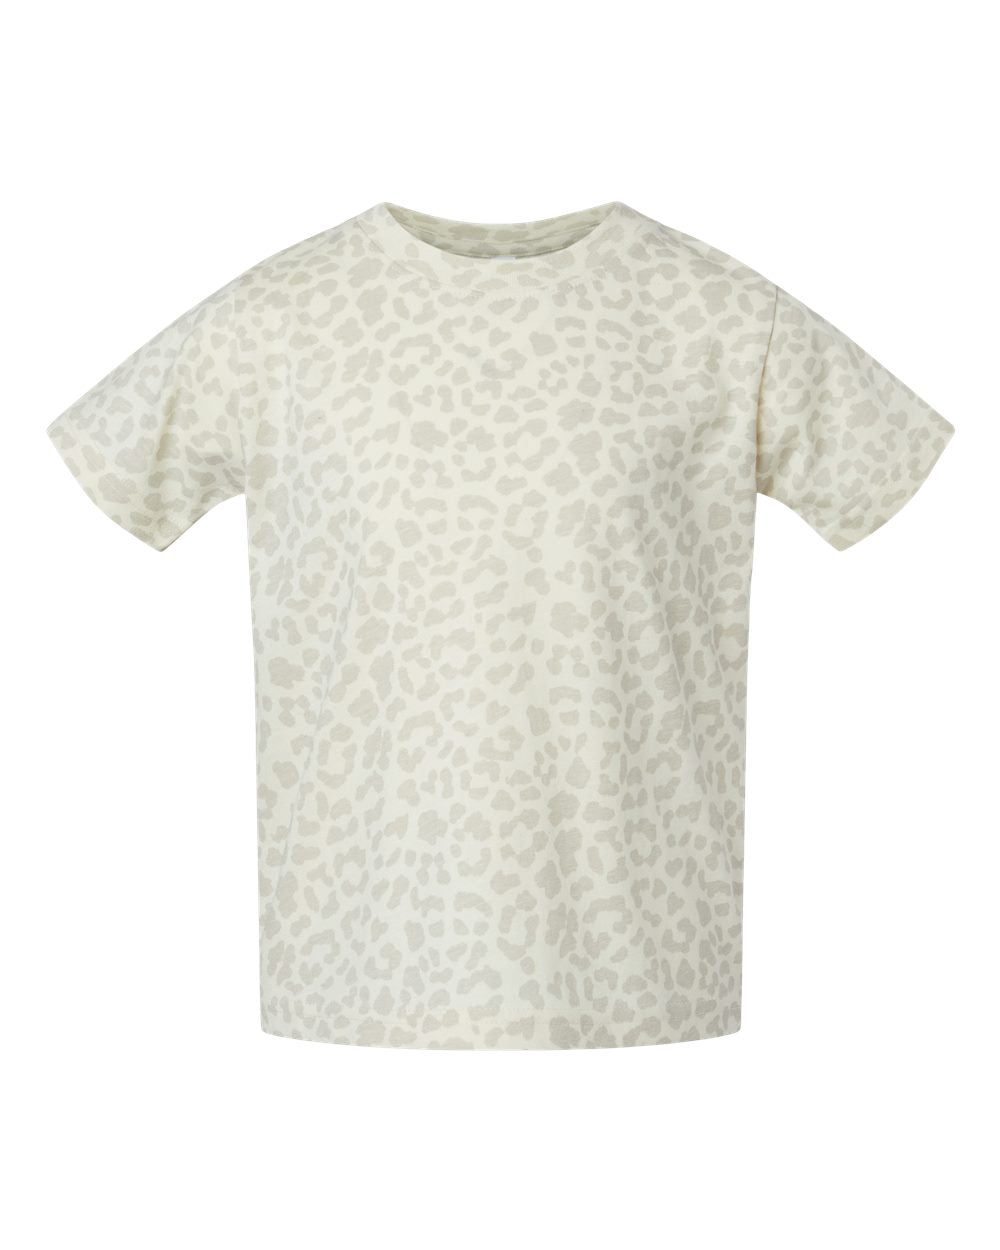 Rabbit Skins Youth Tee - Natural Leopard